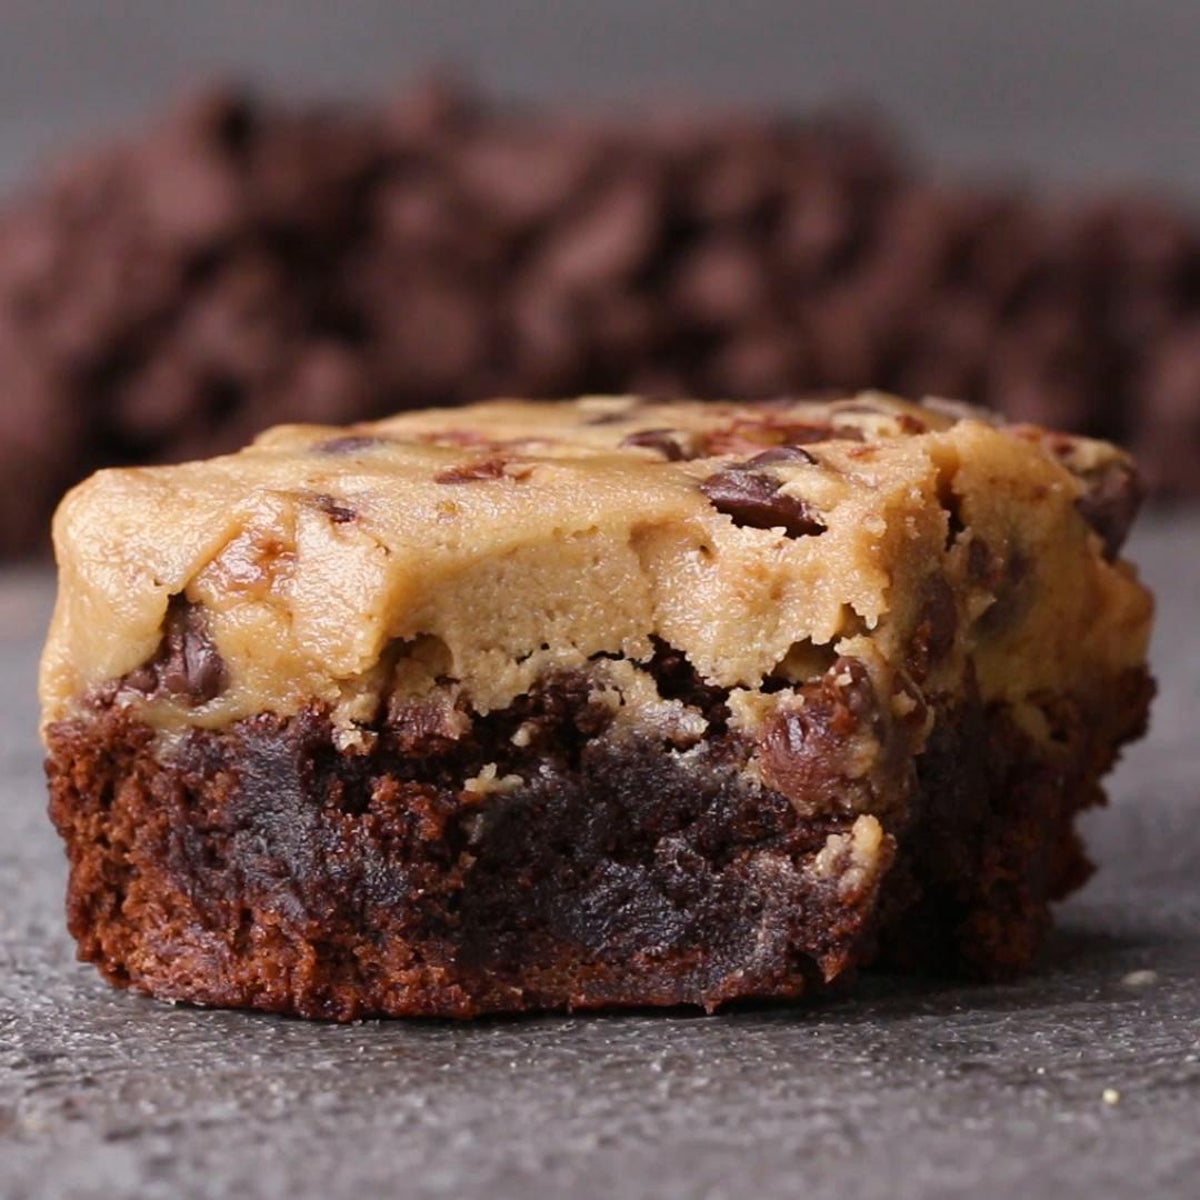 How to Make Box Brownies Better - Cookie Dough and Oven Mitt